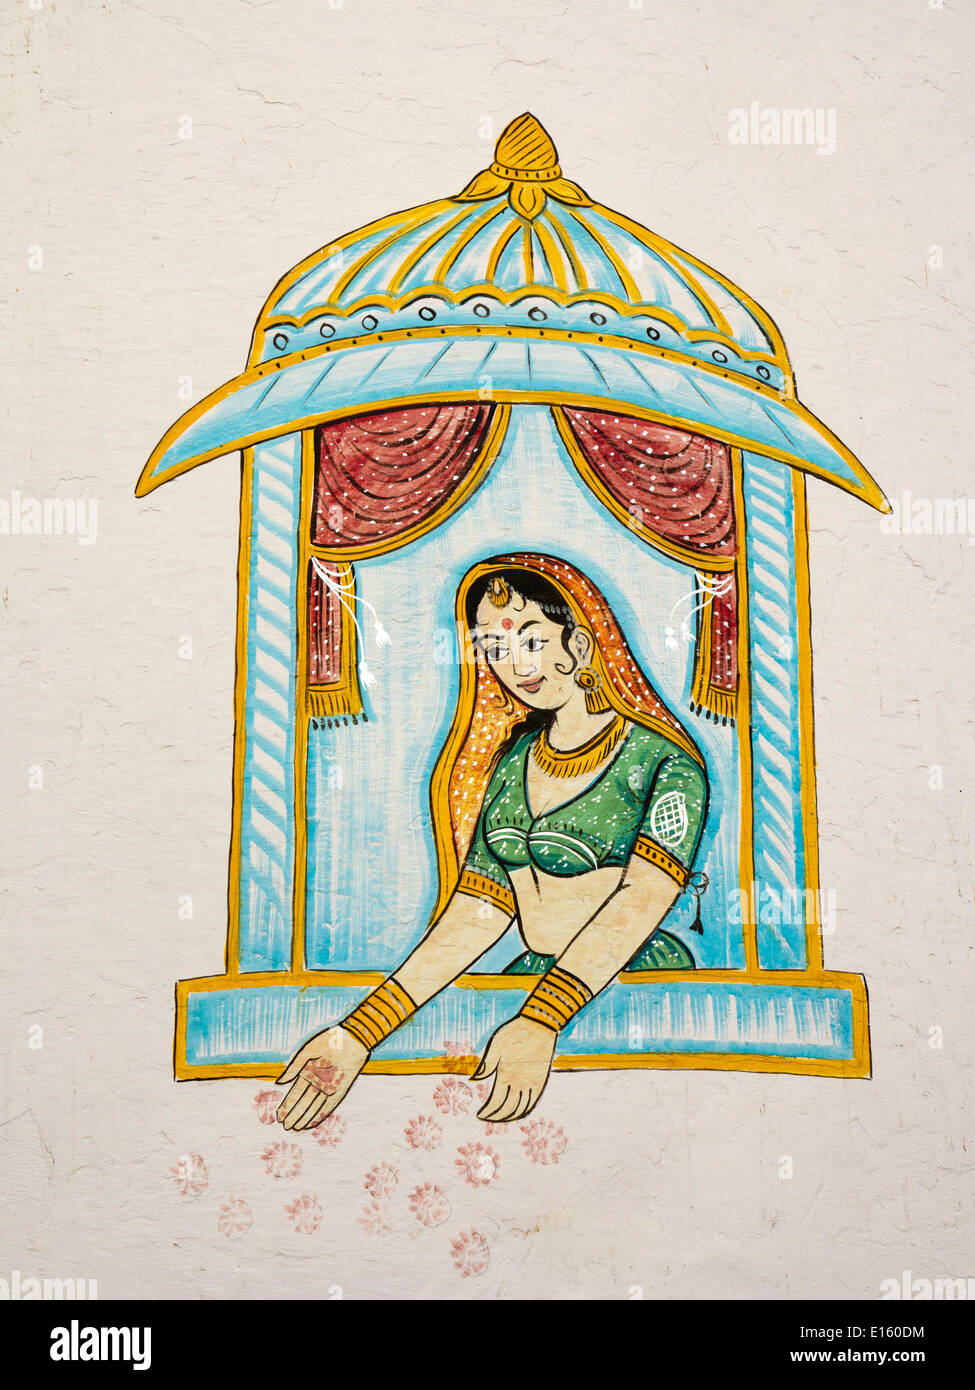 India, Rajasthan, Udaipur, traditional wall painting of Rajput woman, in Mughal style window Stock Photo